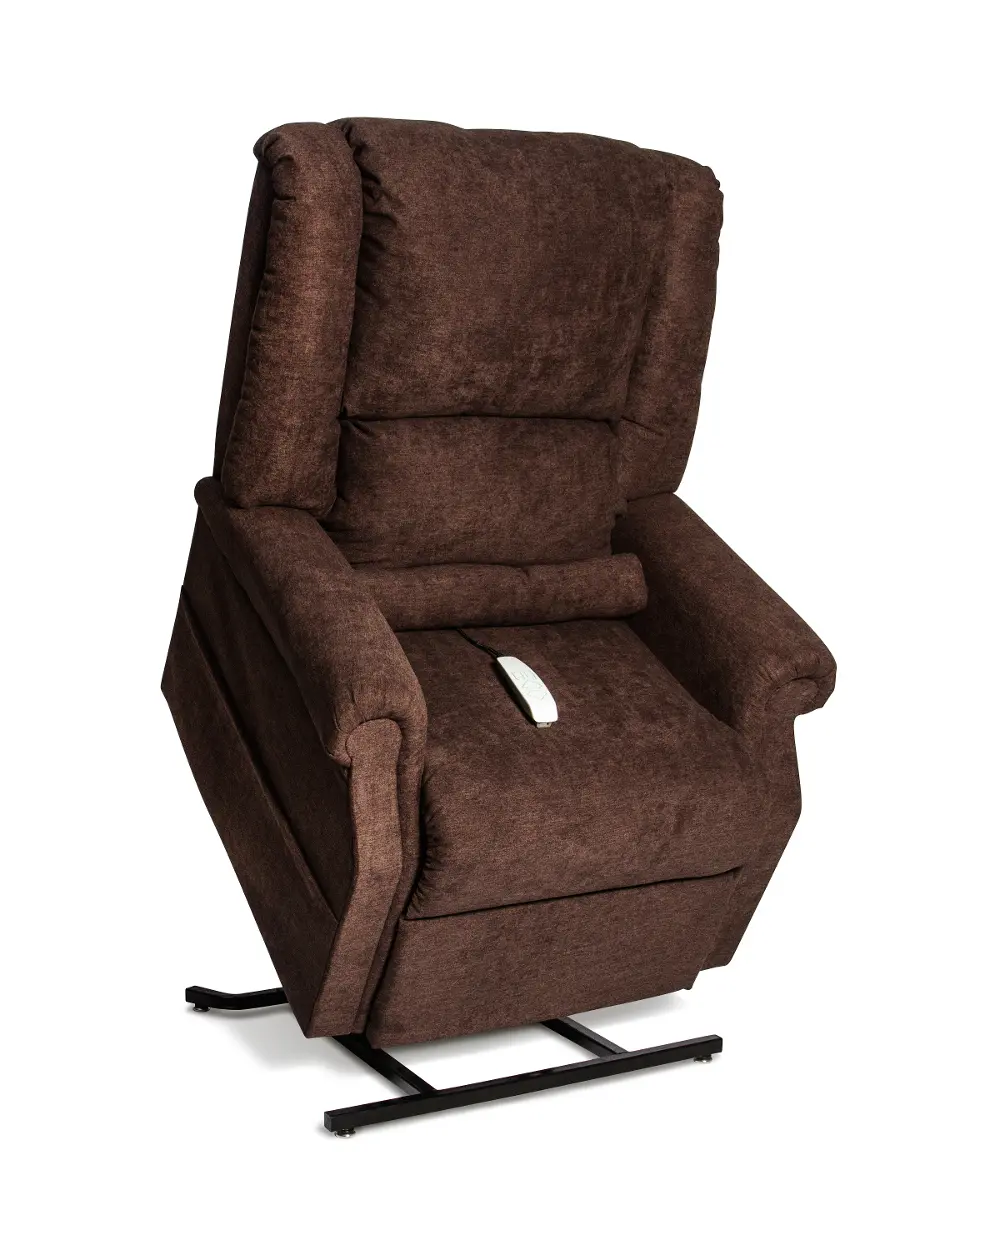 Chocolate Infinite Position Reclining Lift Chair -1